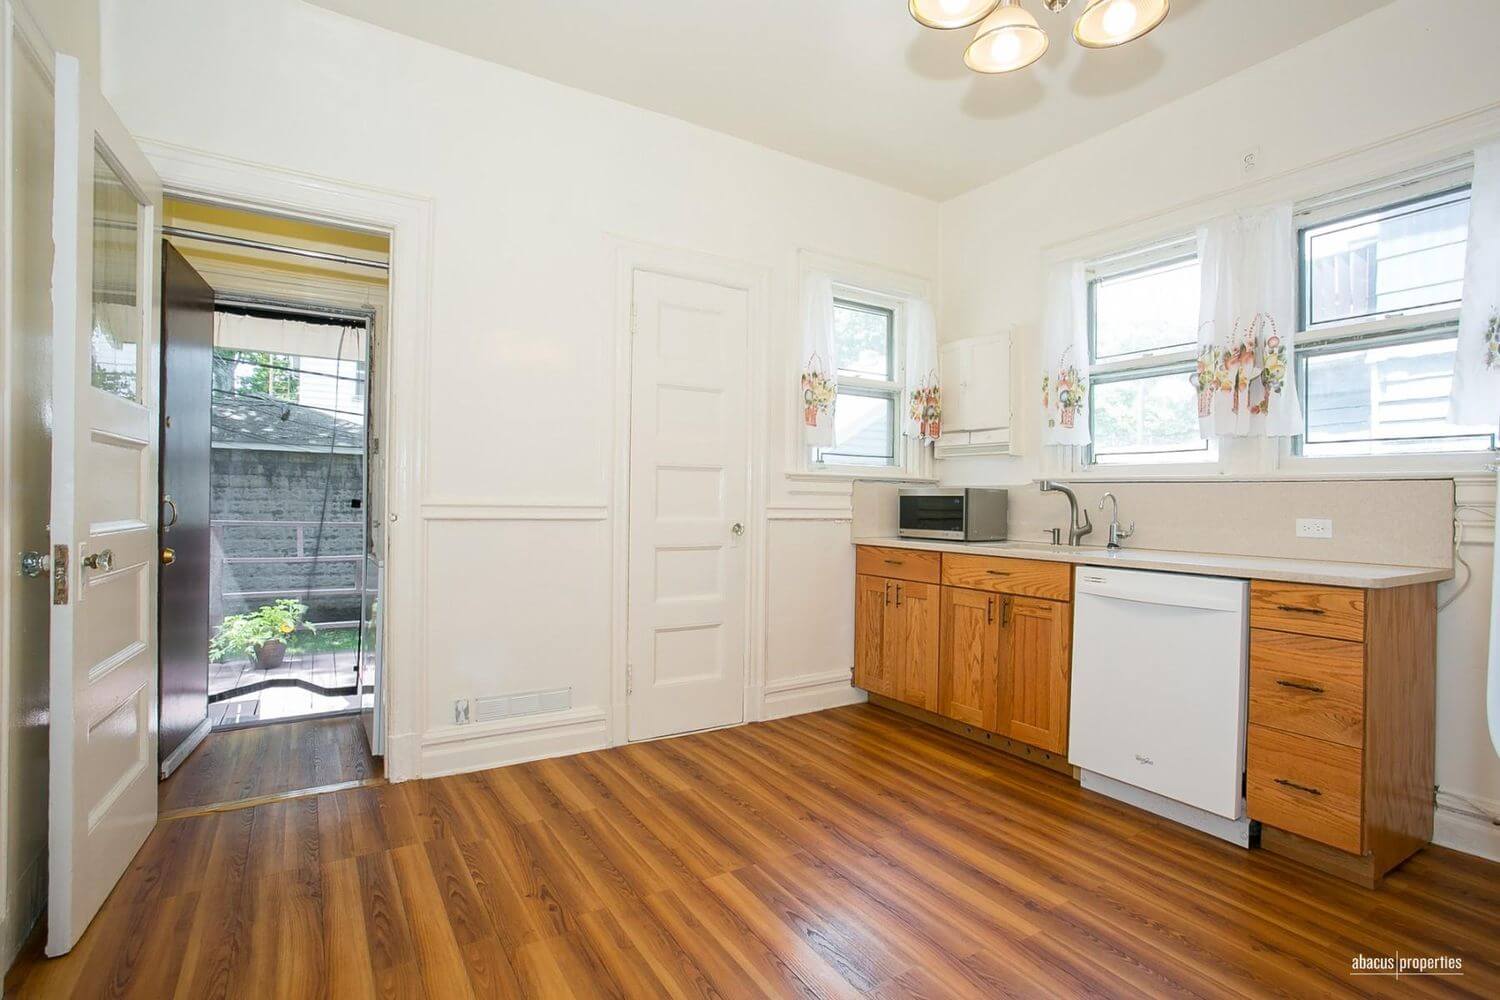 ditmas park west rental at 512 westminster